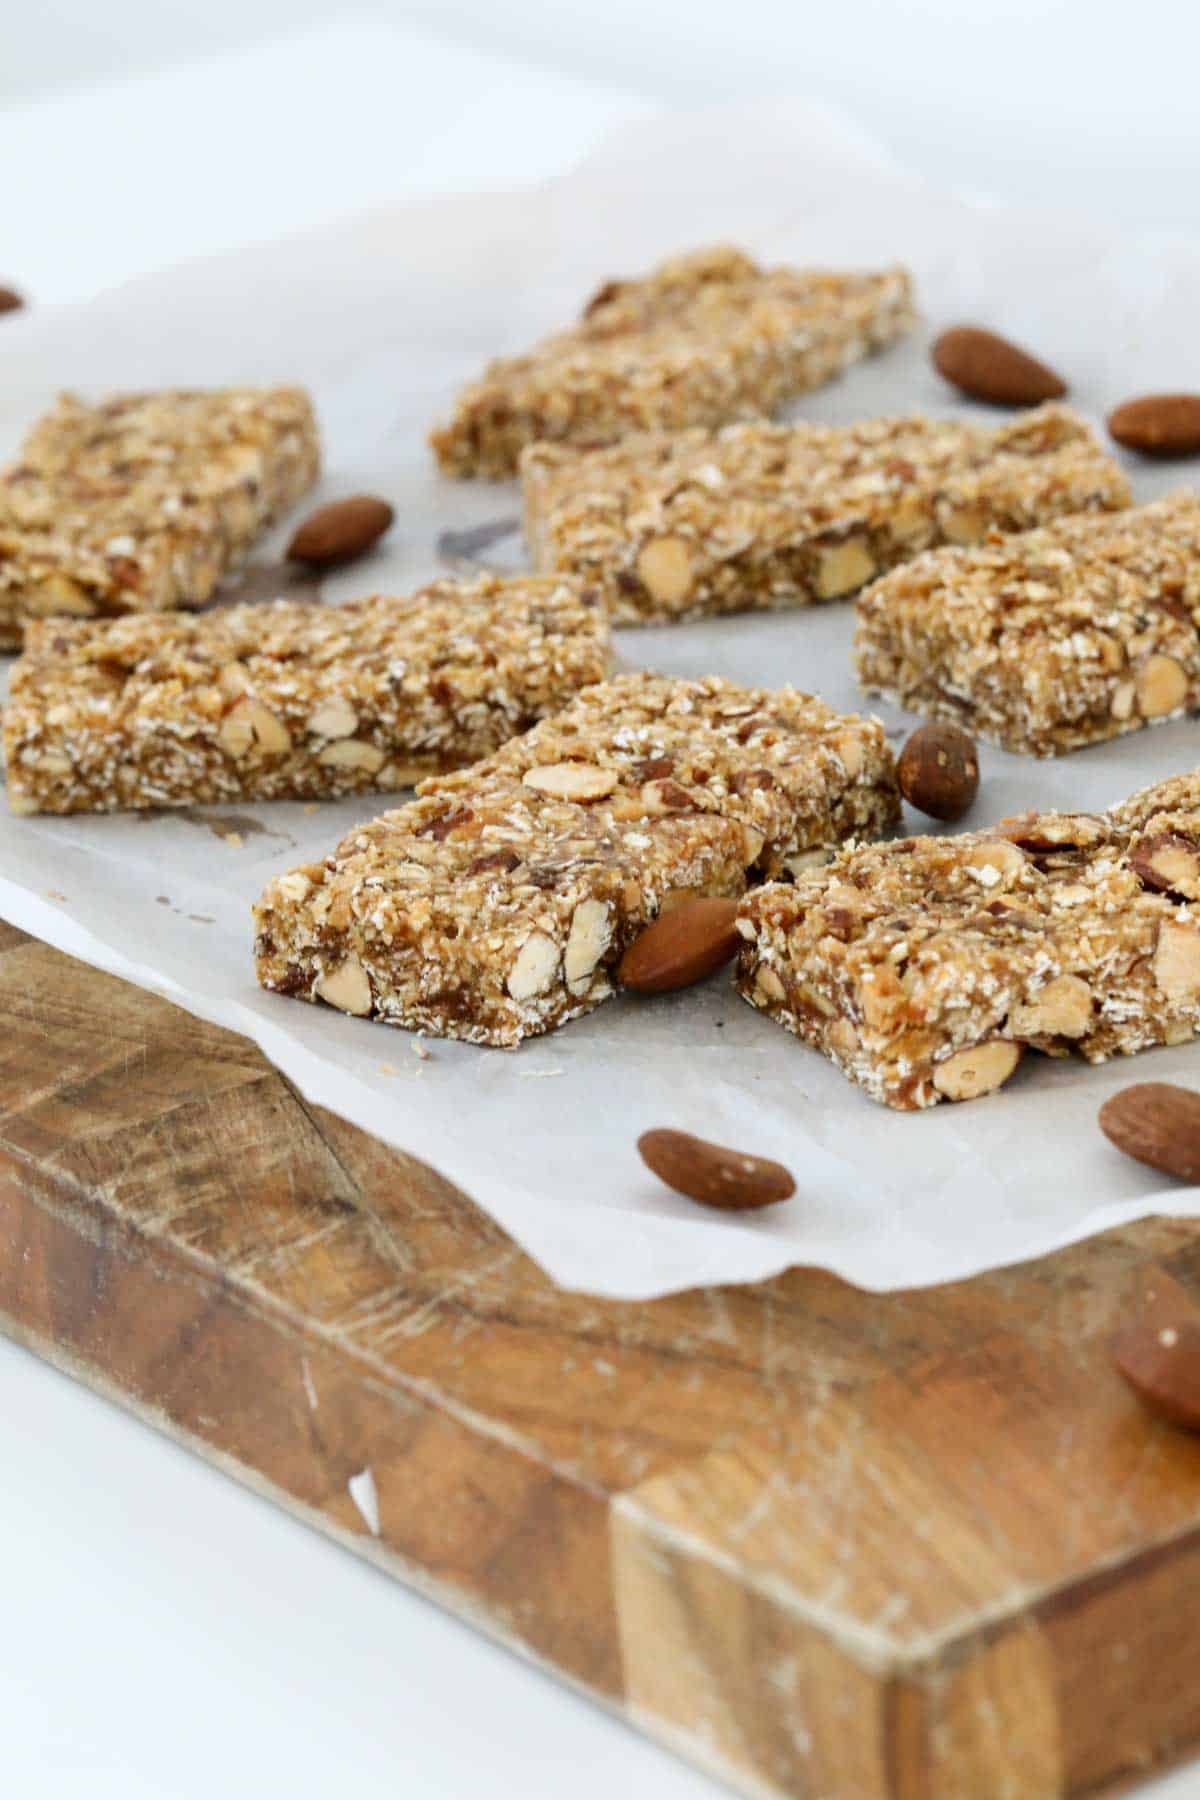 Peanut butter and almond bars cut into pieces on a chopping board.